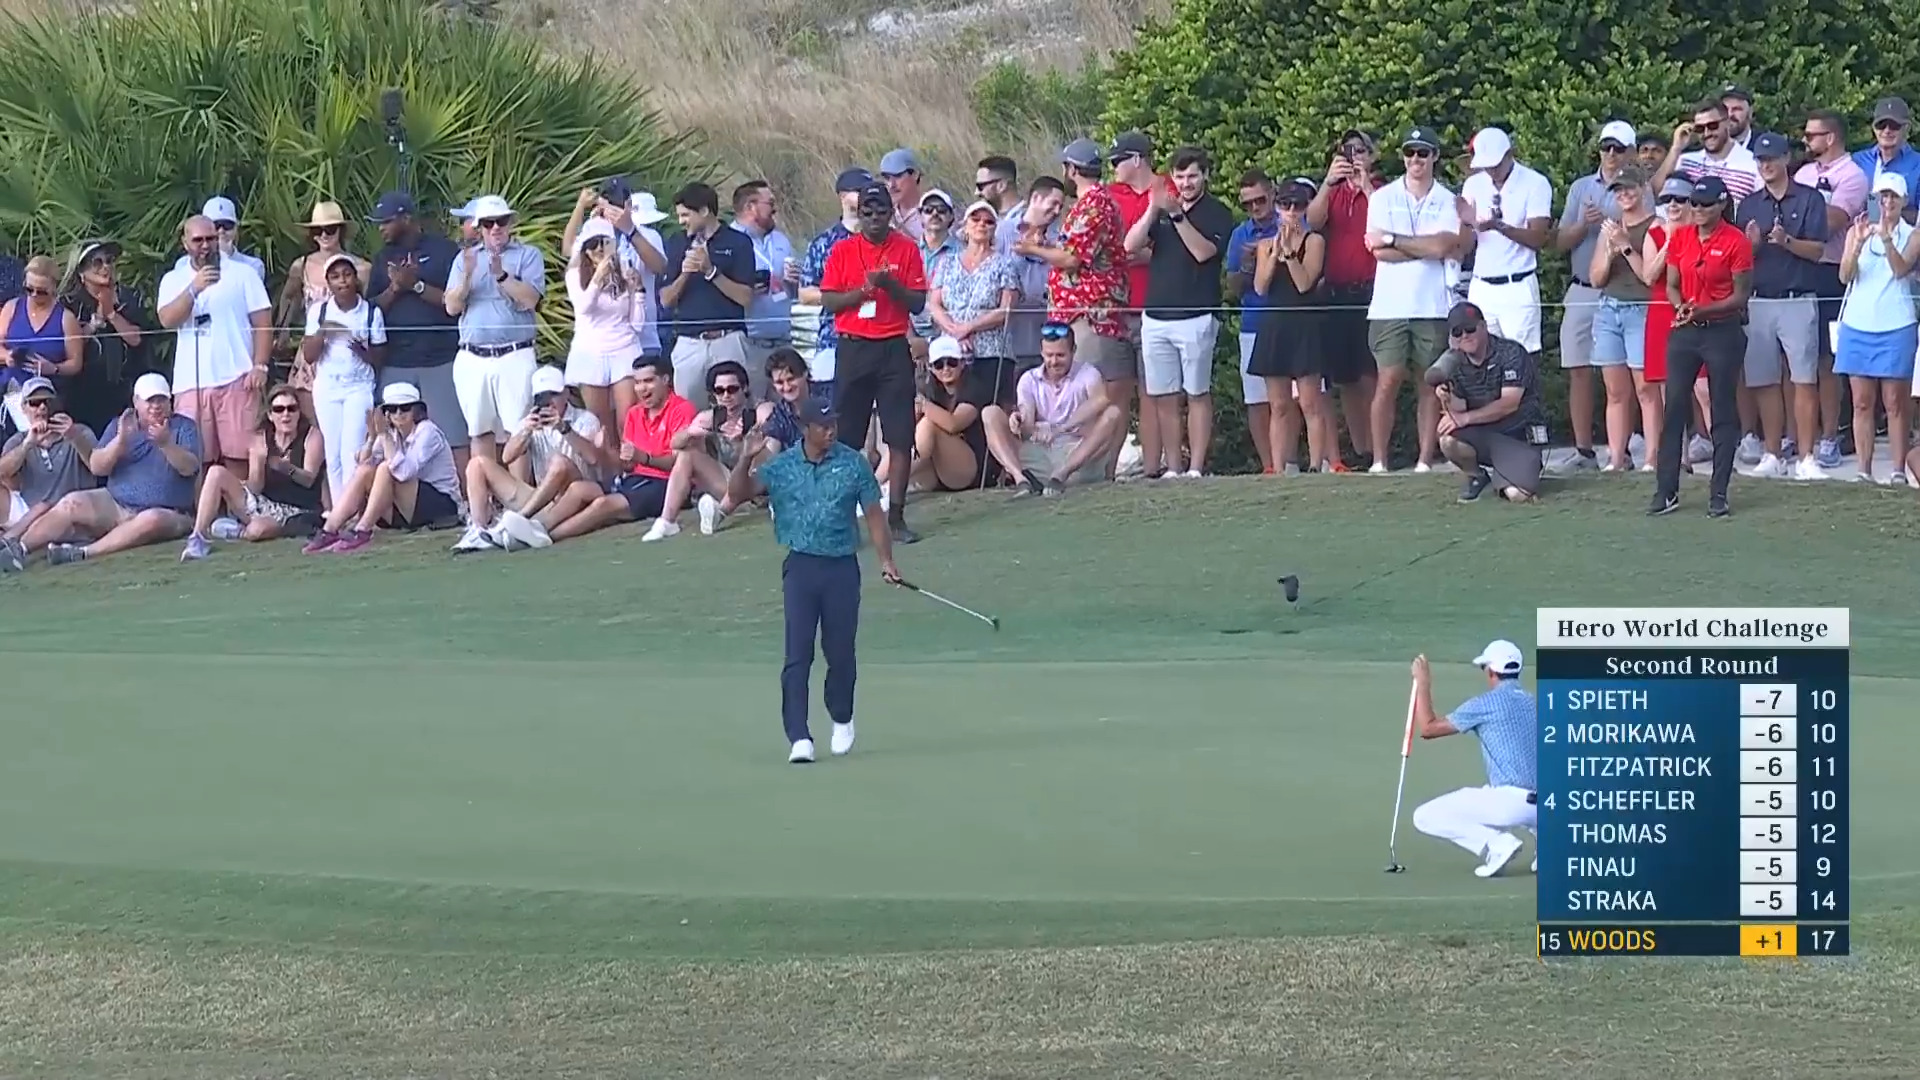 Tiger Woods posted a three-second swing video and the tour pros